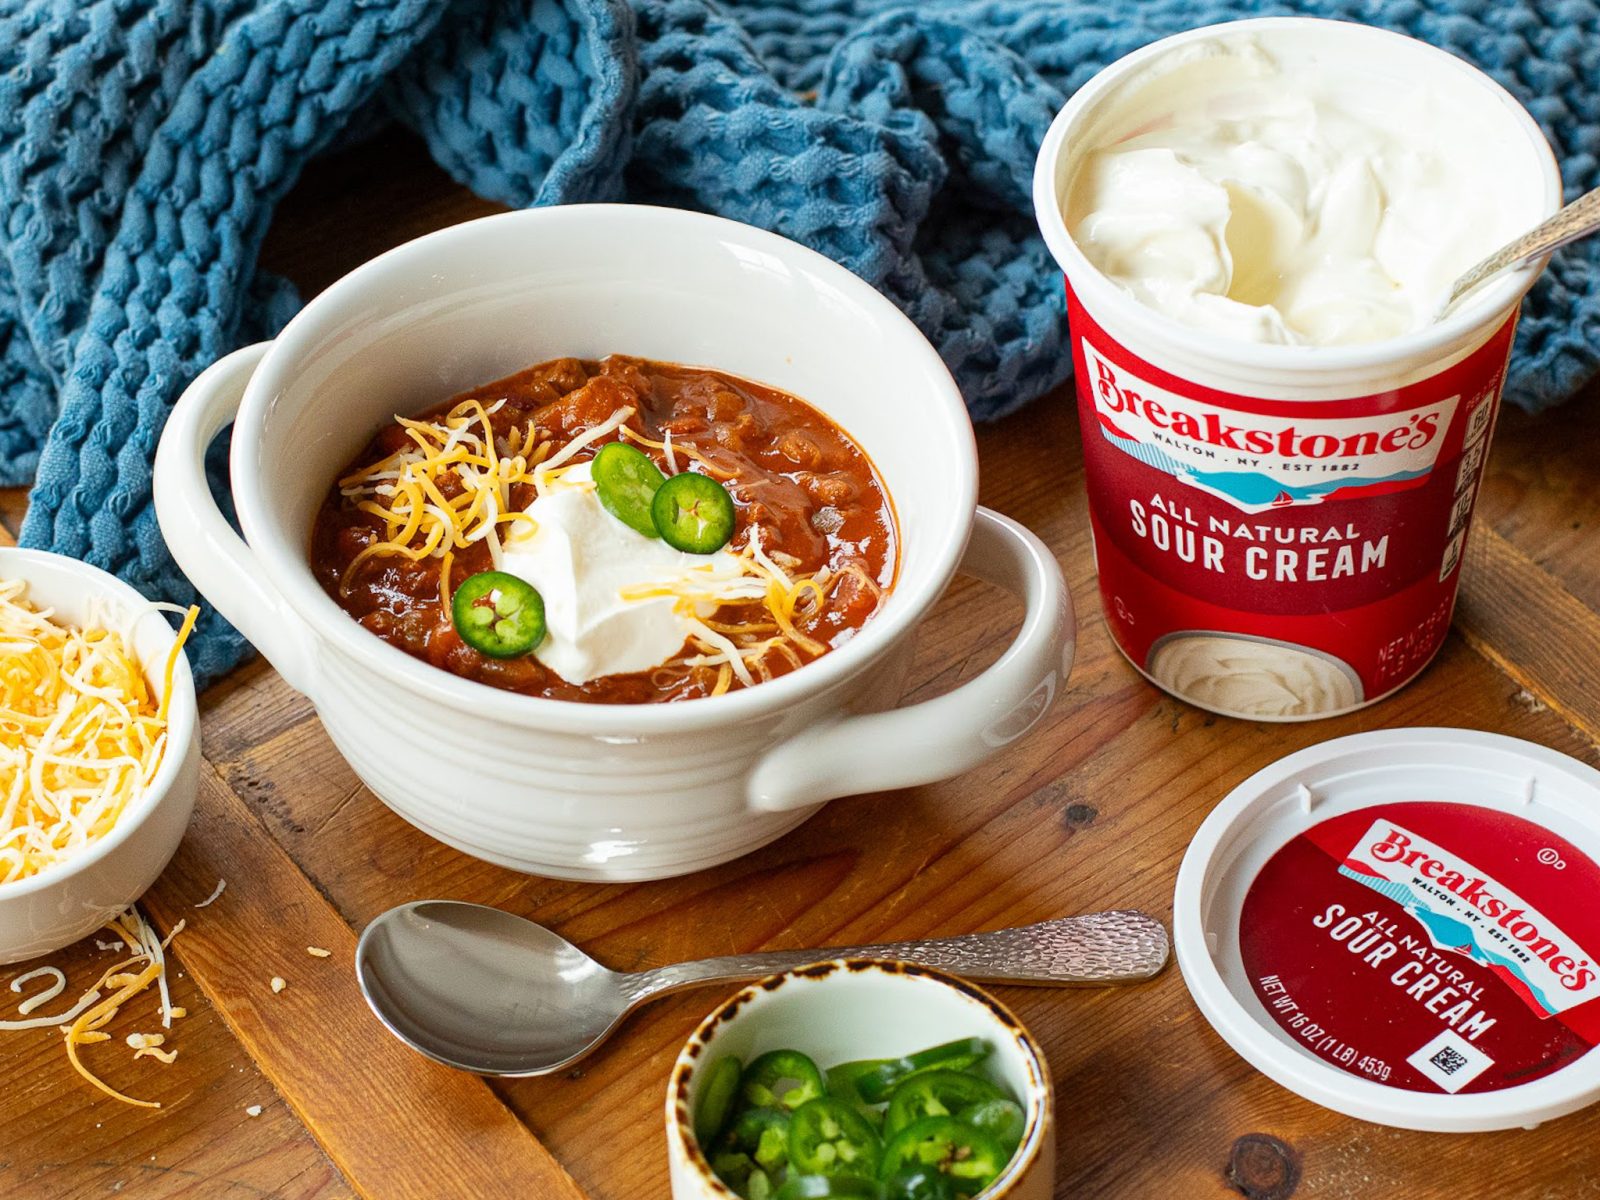 Get Breakstone’s Sour Cream As Low As 99¢ At Kroger